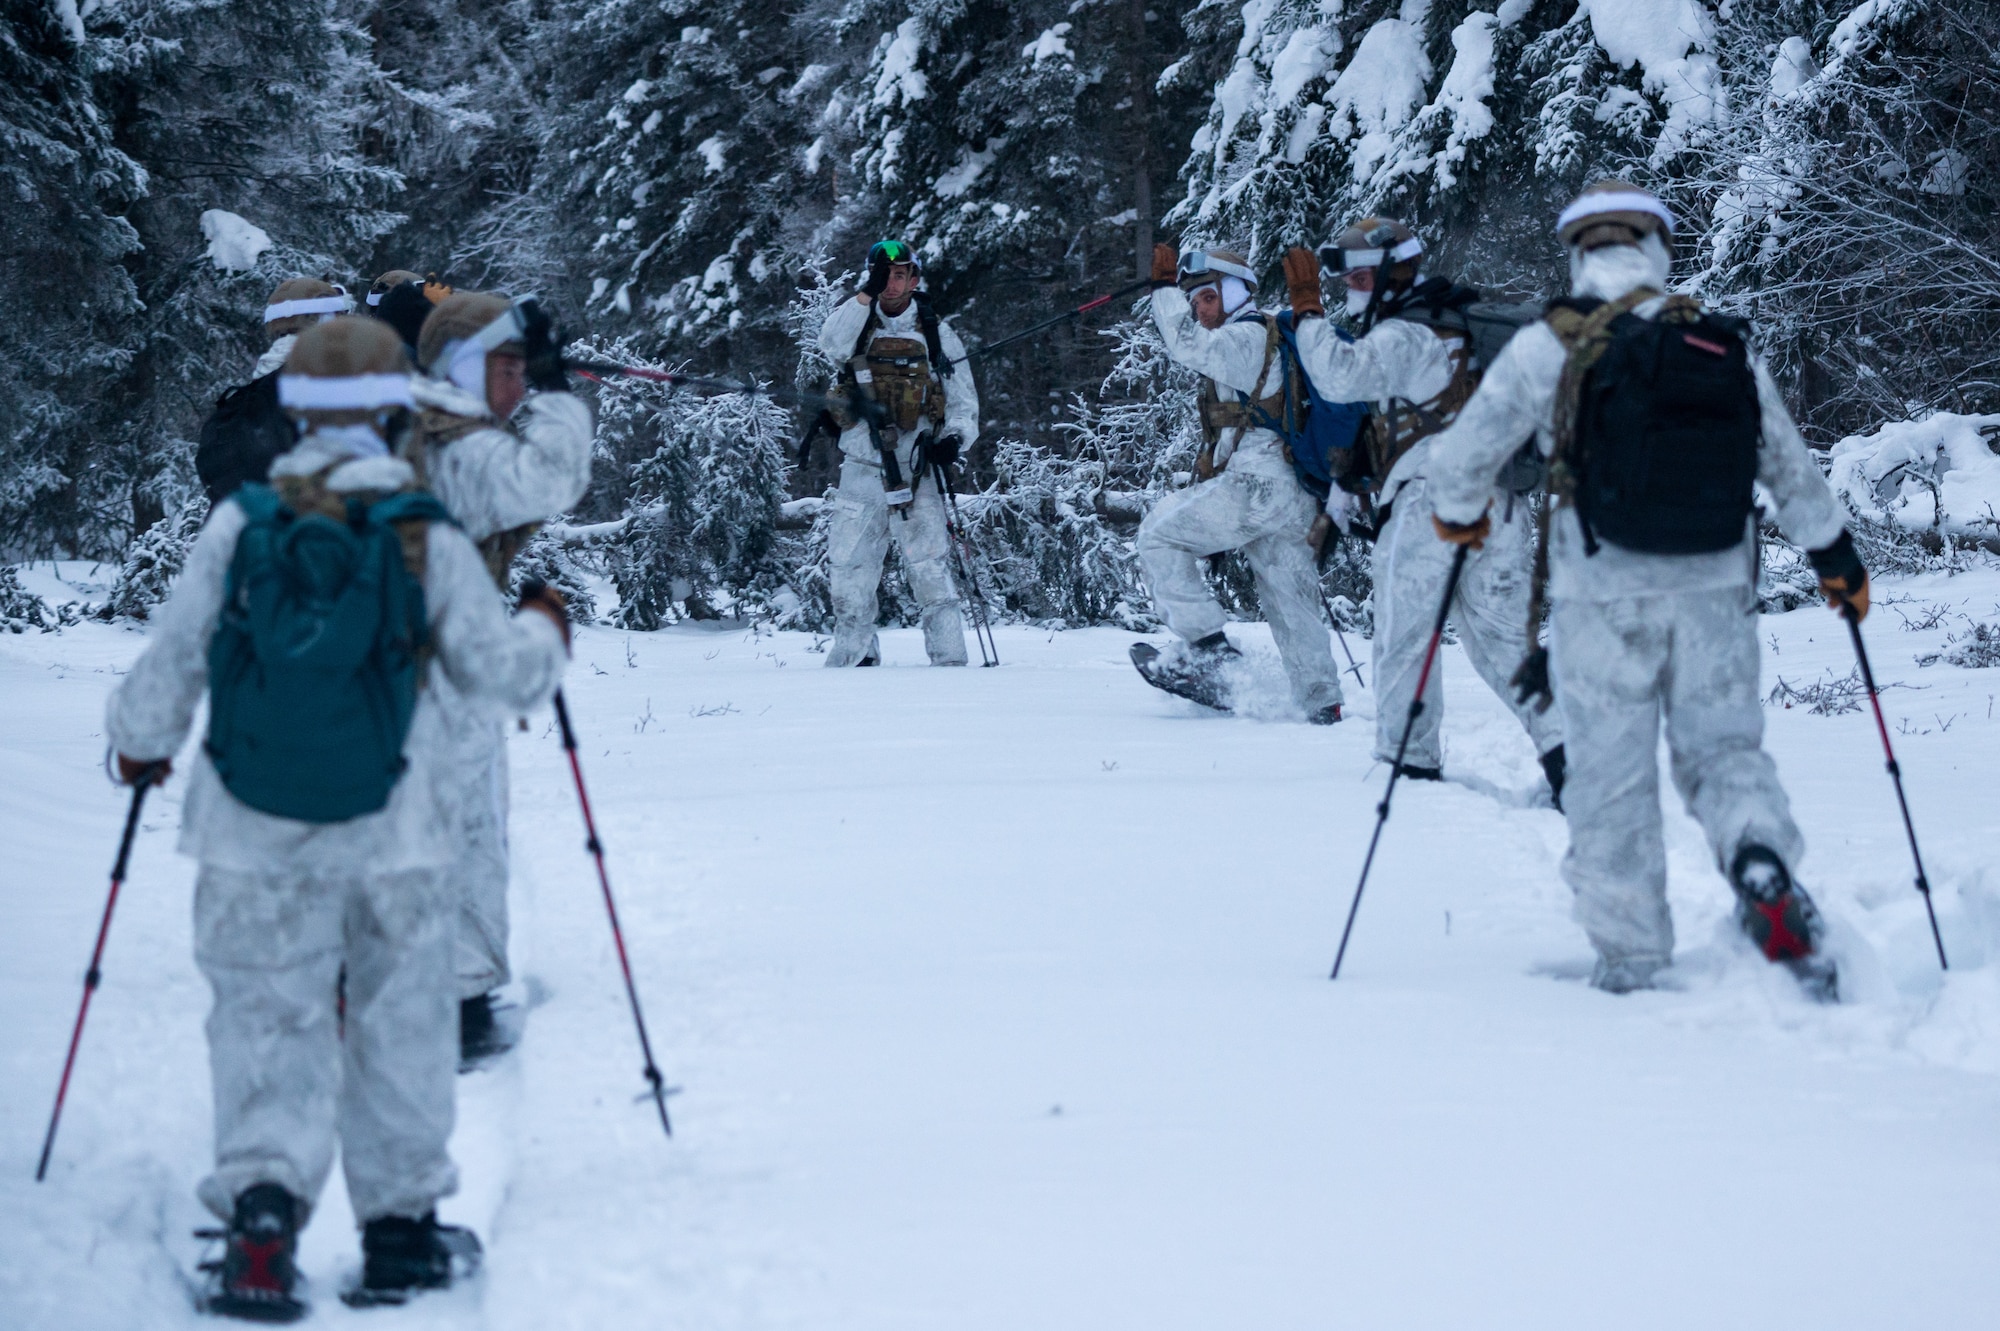 Airmen conduct a simulated combat training in extreme-cold conditions